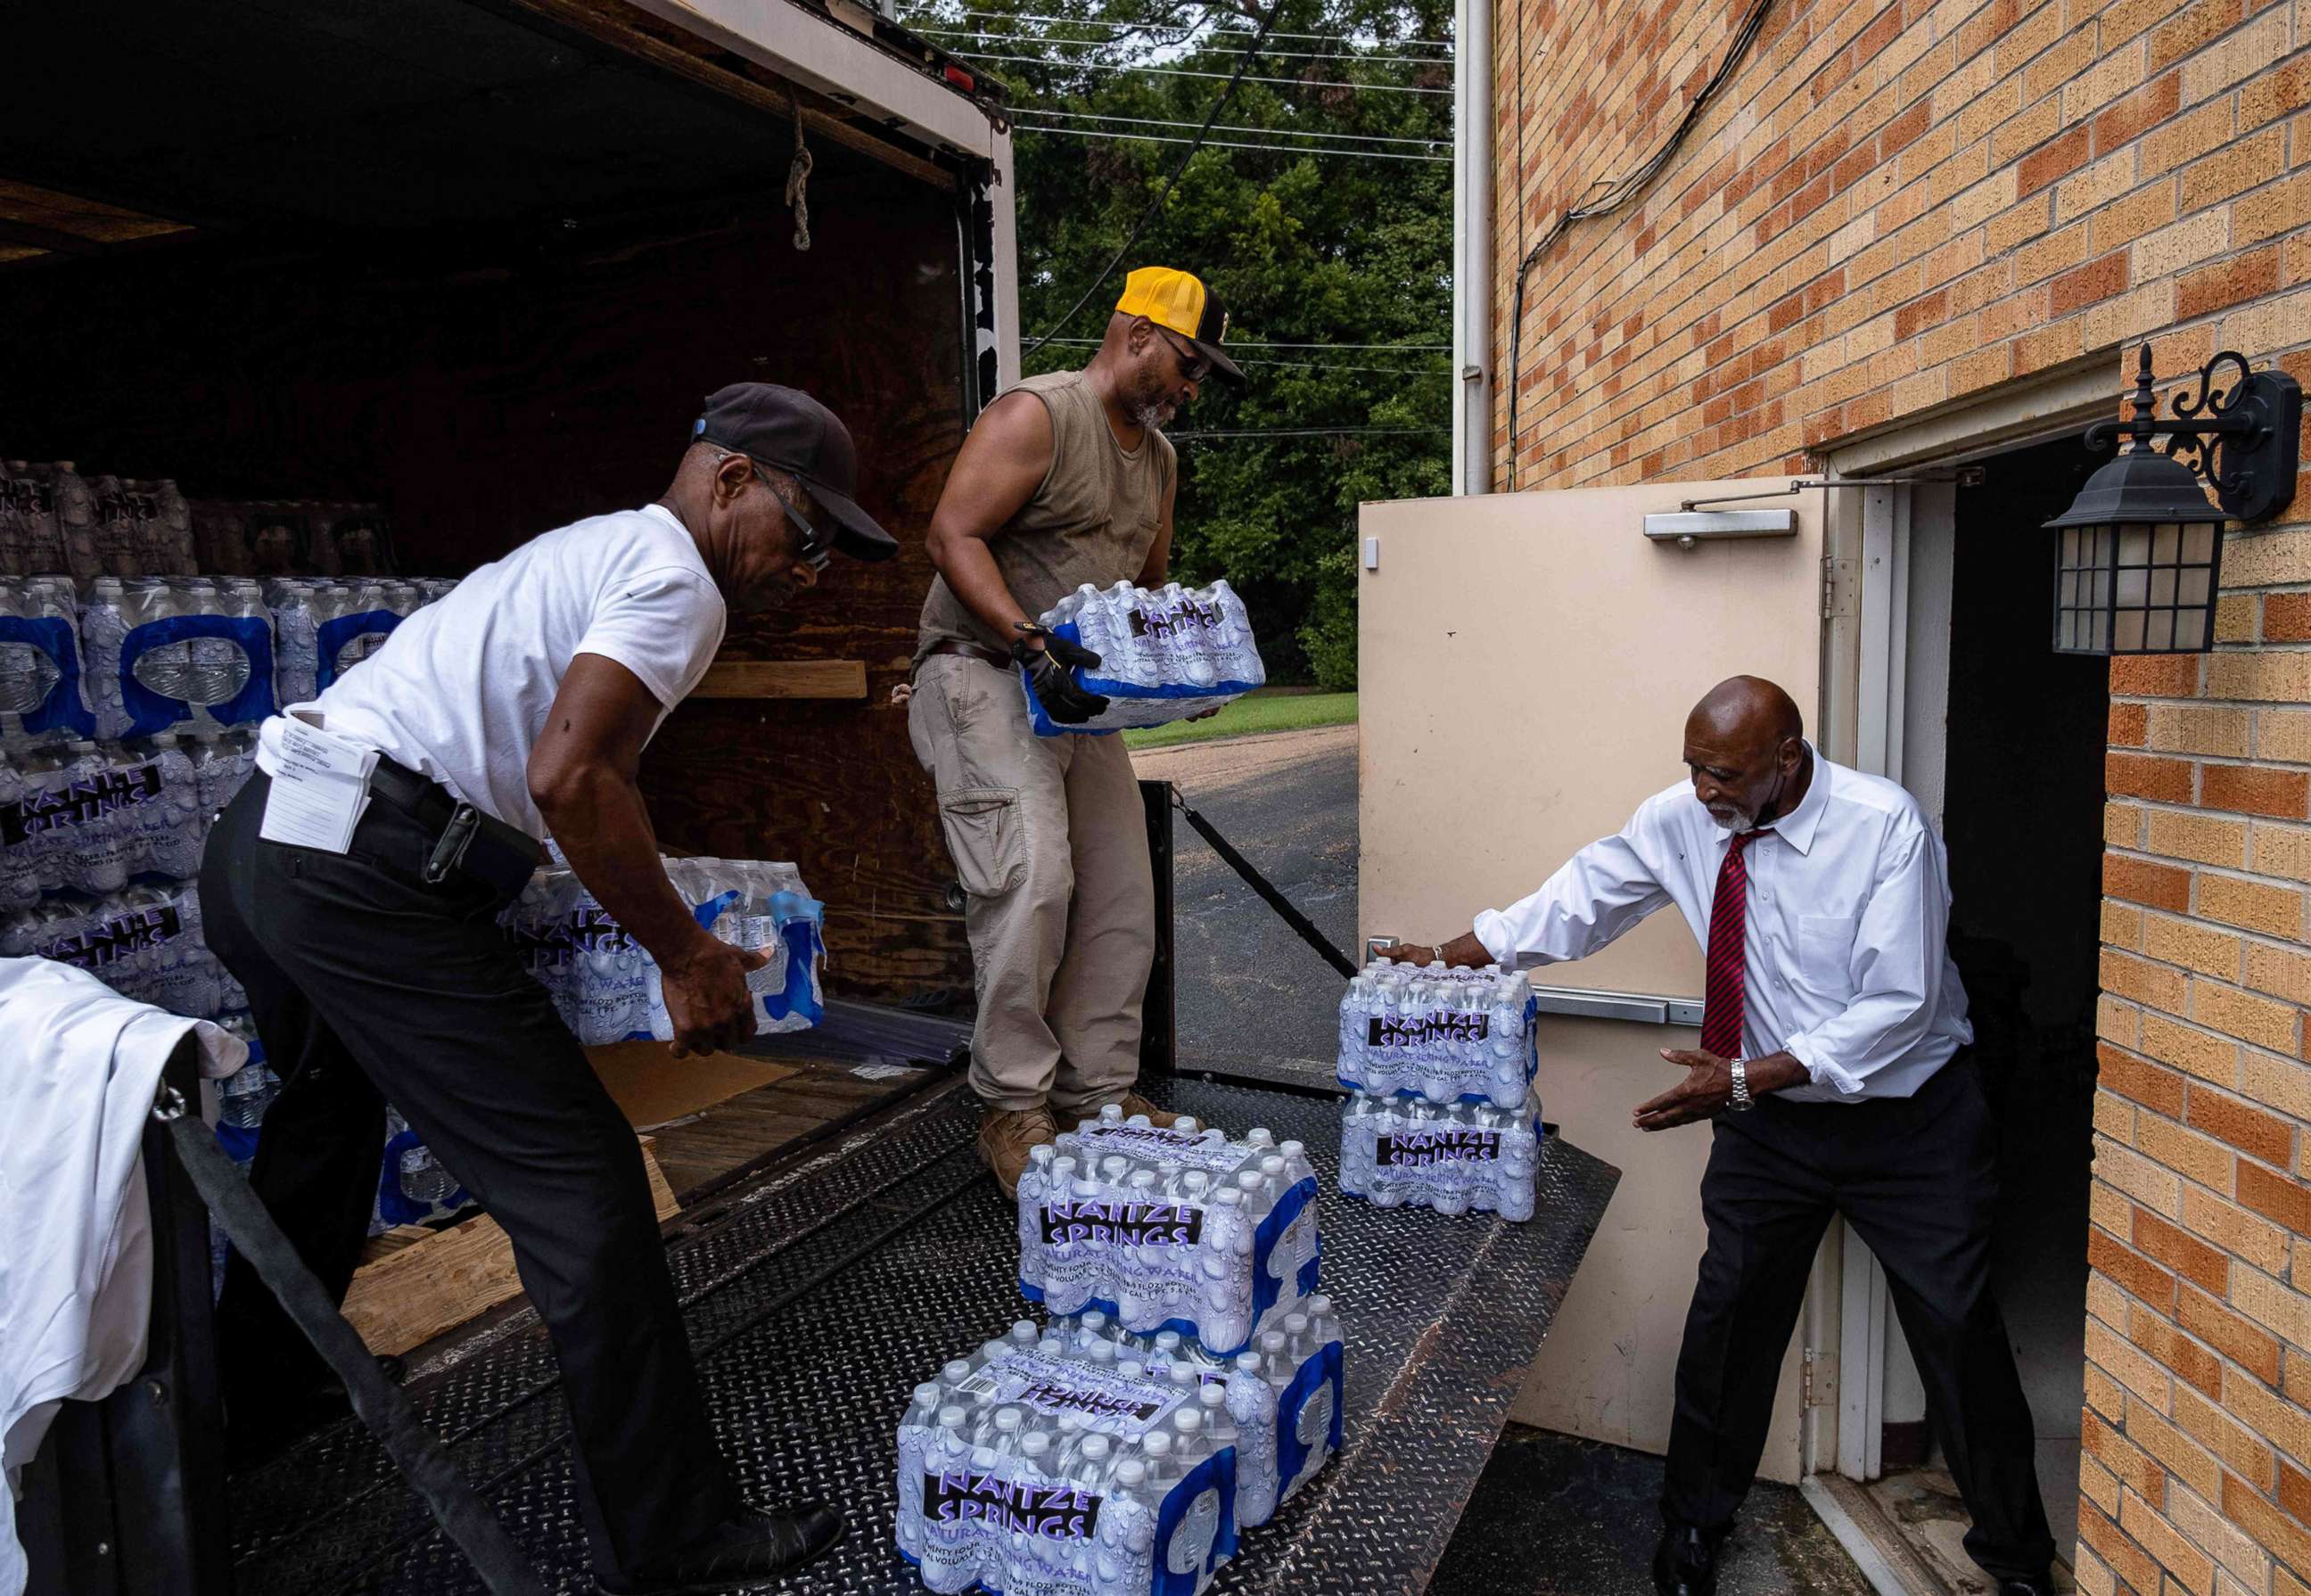 PHOTO: Members of Progressive Morningstar Baptist Church move cases of water following a Sunday morning service in Jackson, Miss., on Sept. 4, 2022.